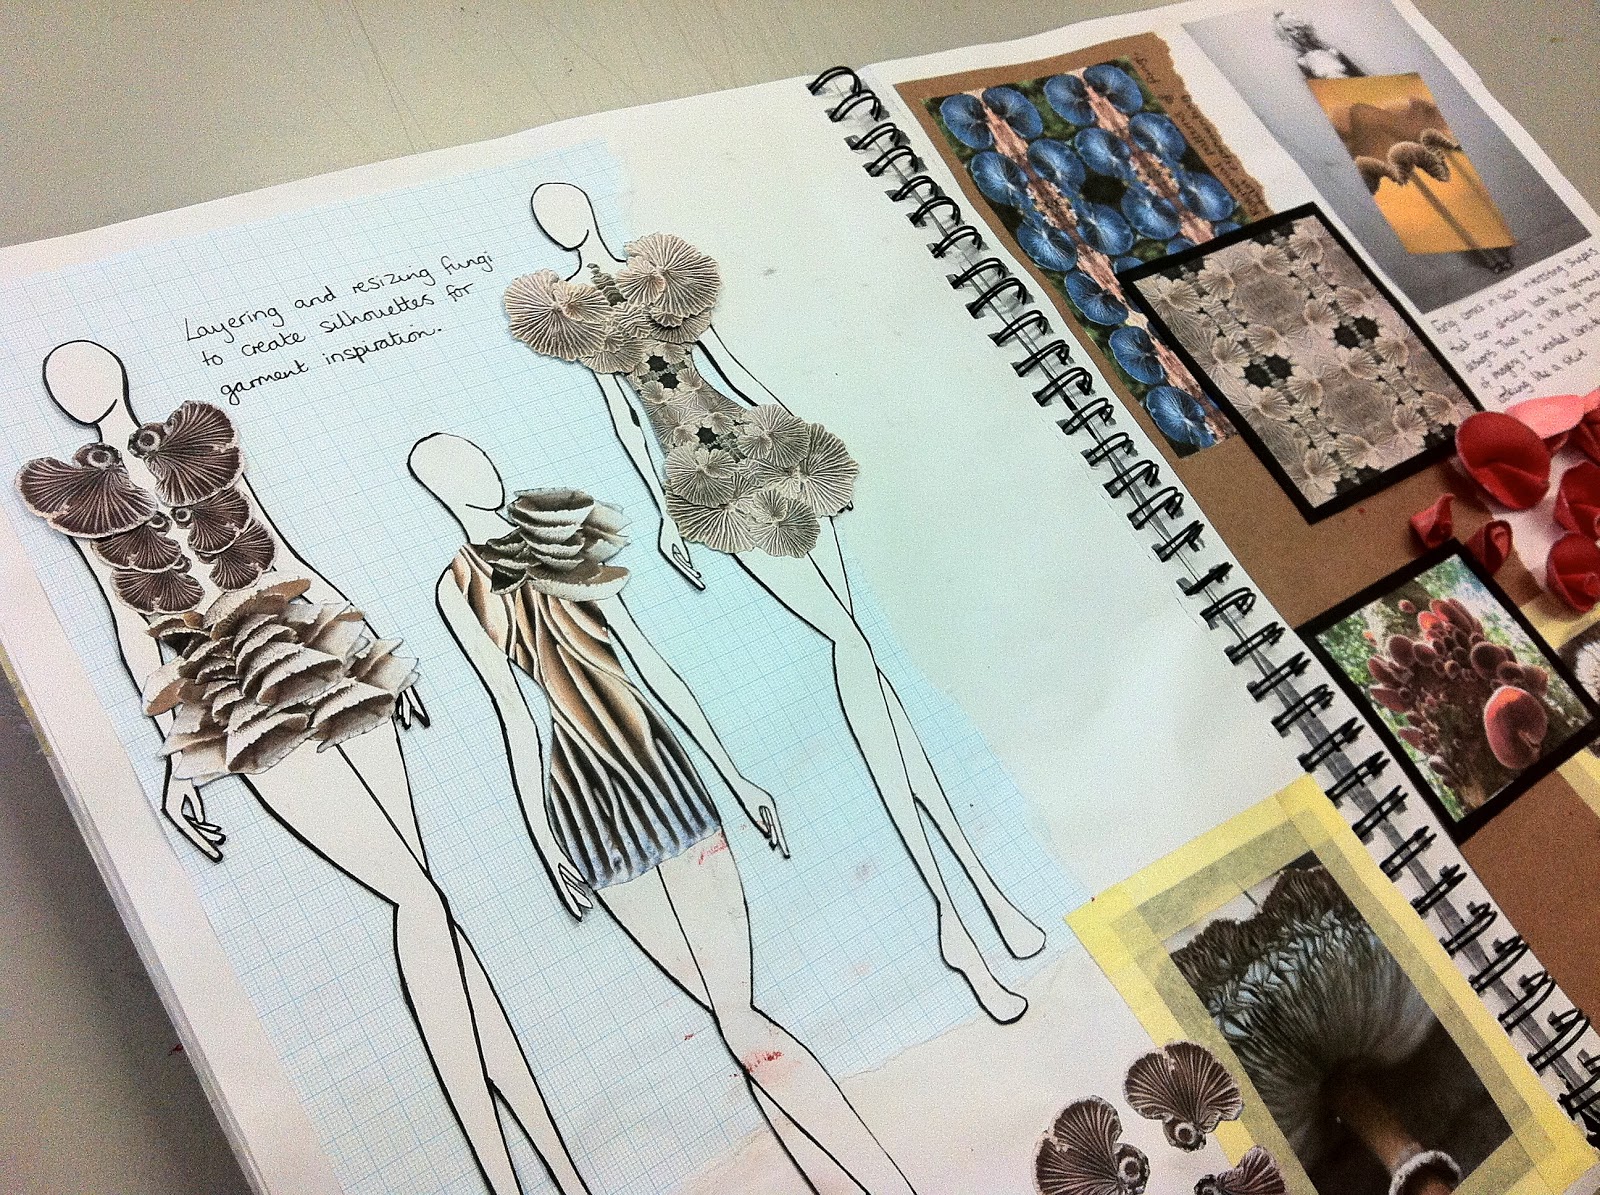 Fashion design research papers